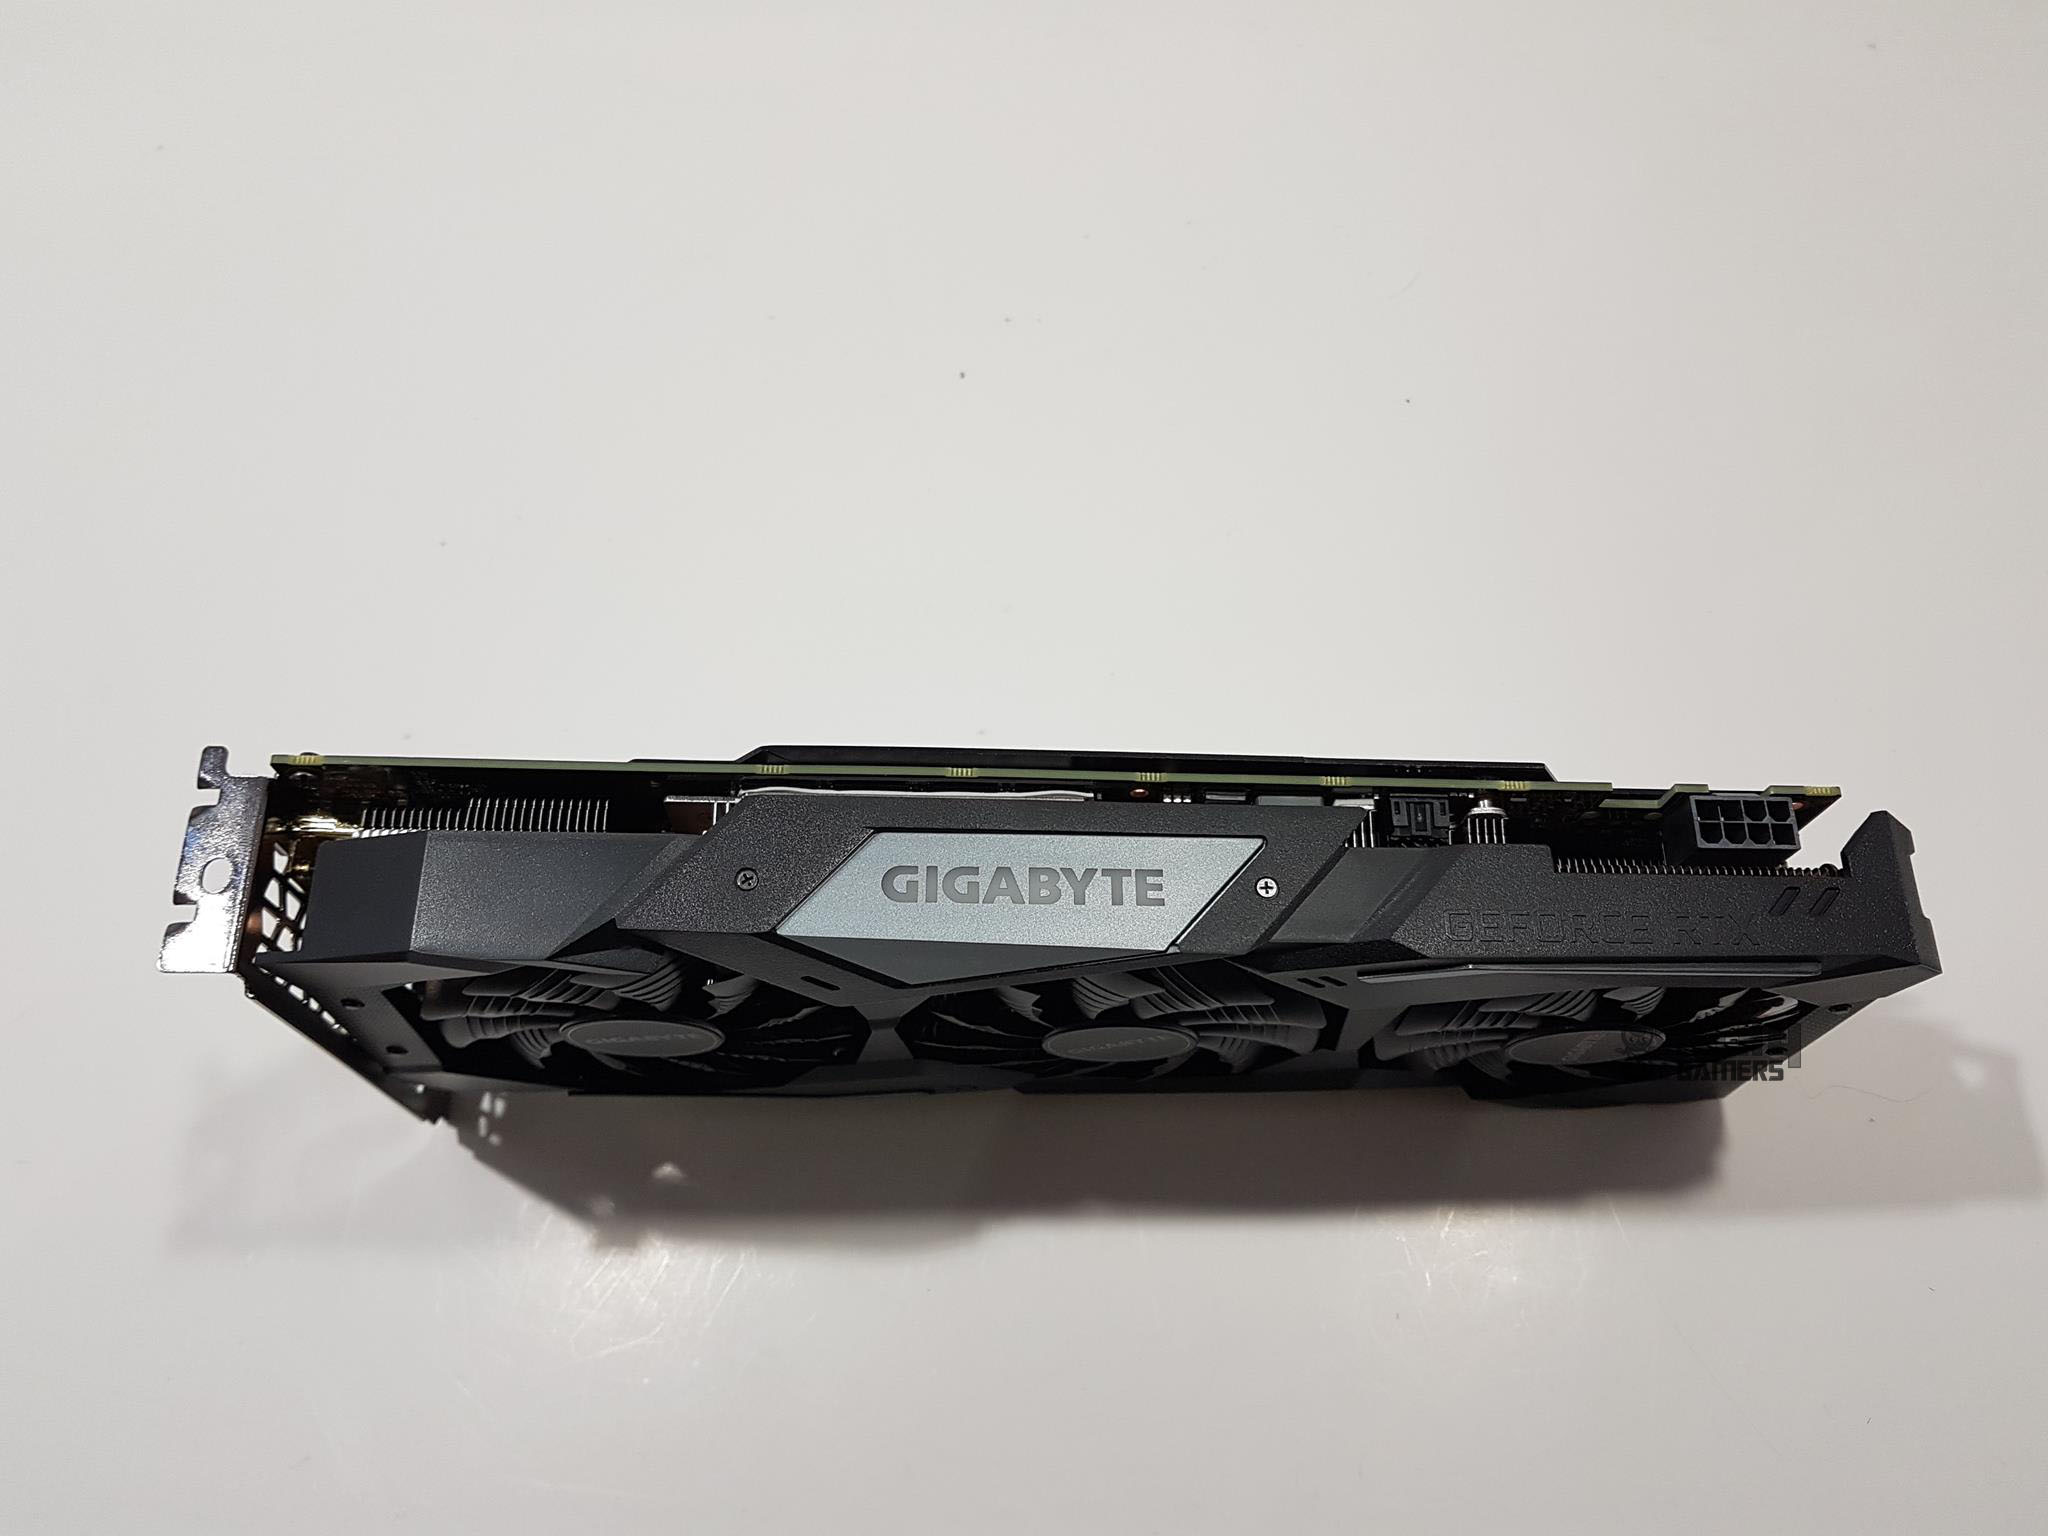 Gigabyte GeForce RTX 2060 Gaming Pro OC 6G — The top side of the GPU